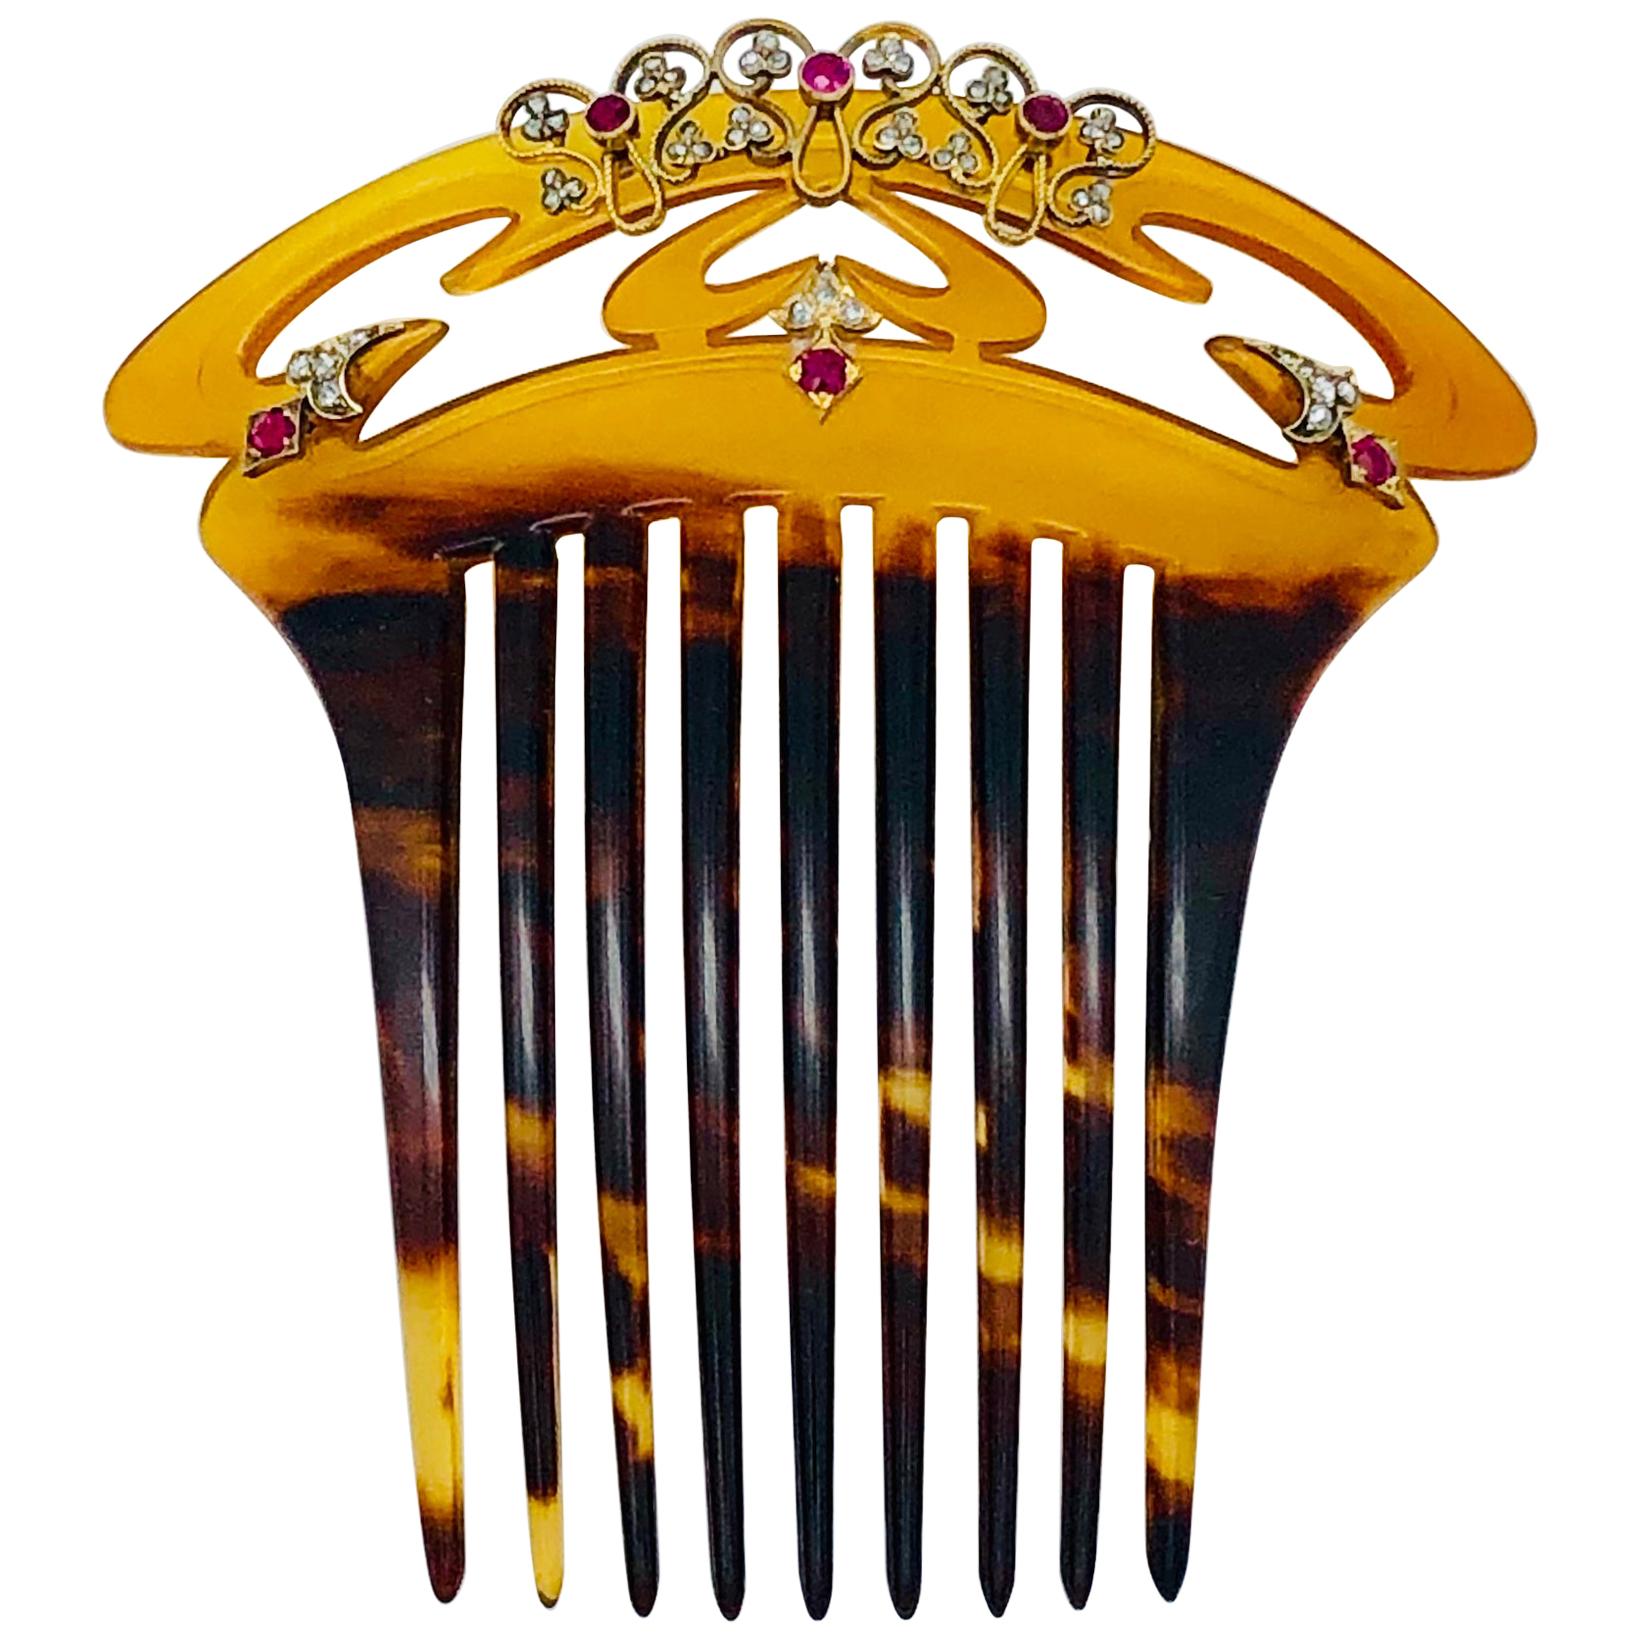 Antique Silver Hair Comb - 4 For Sale on 1stDibs